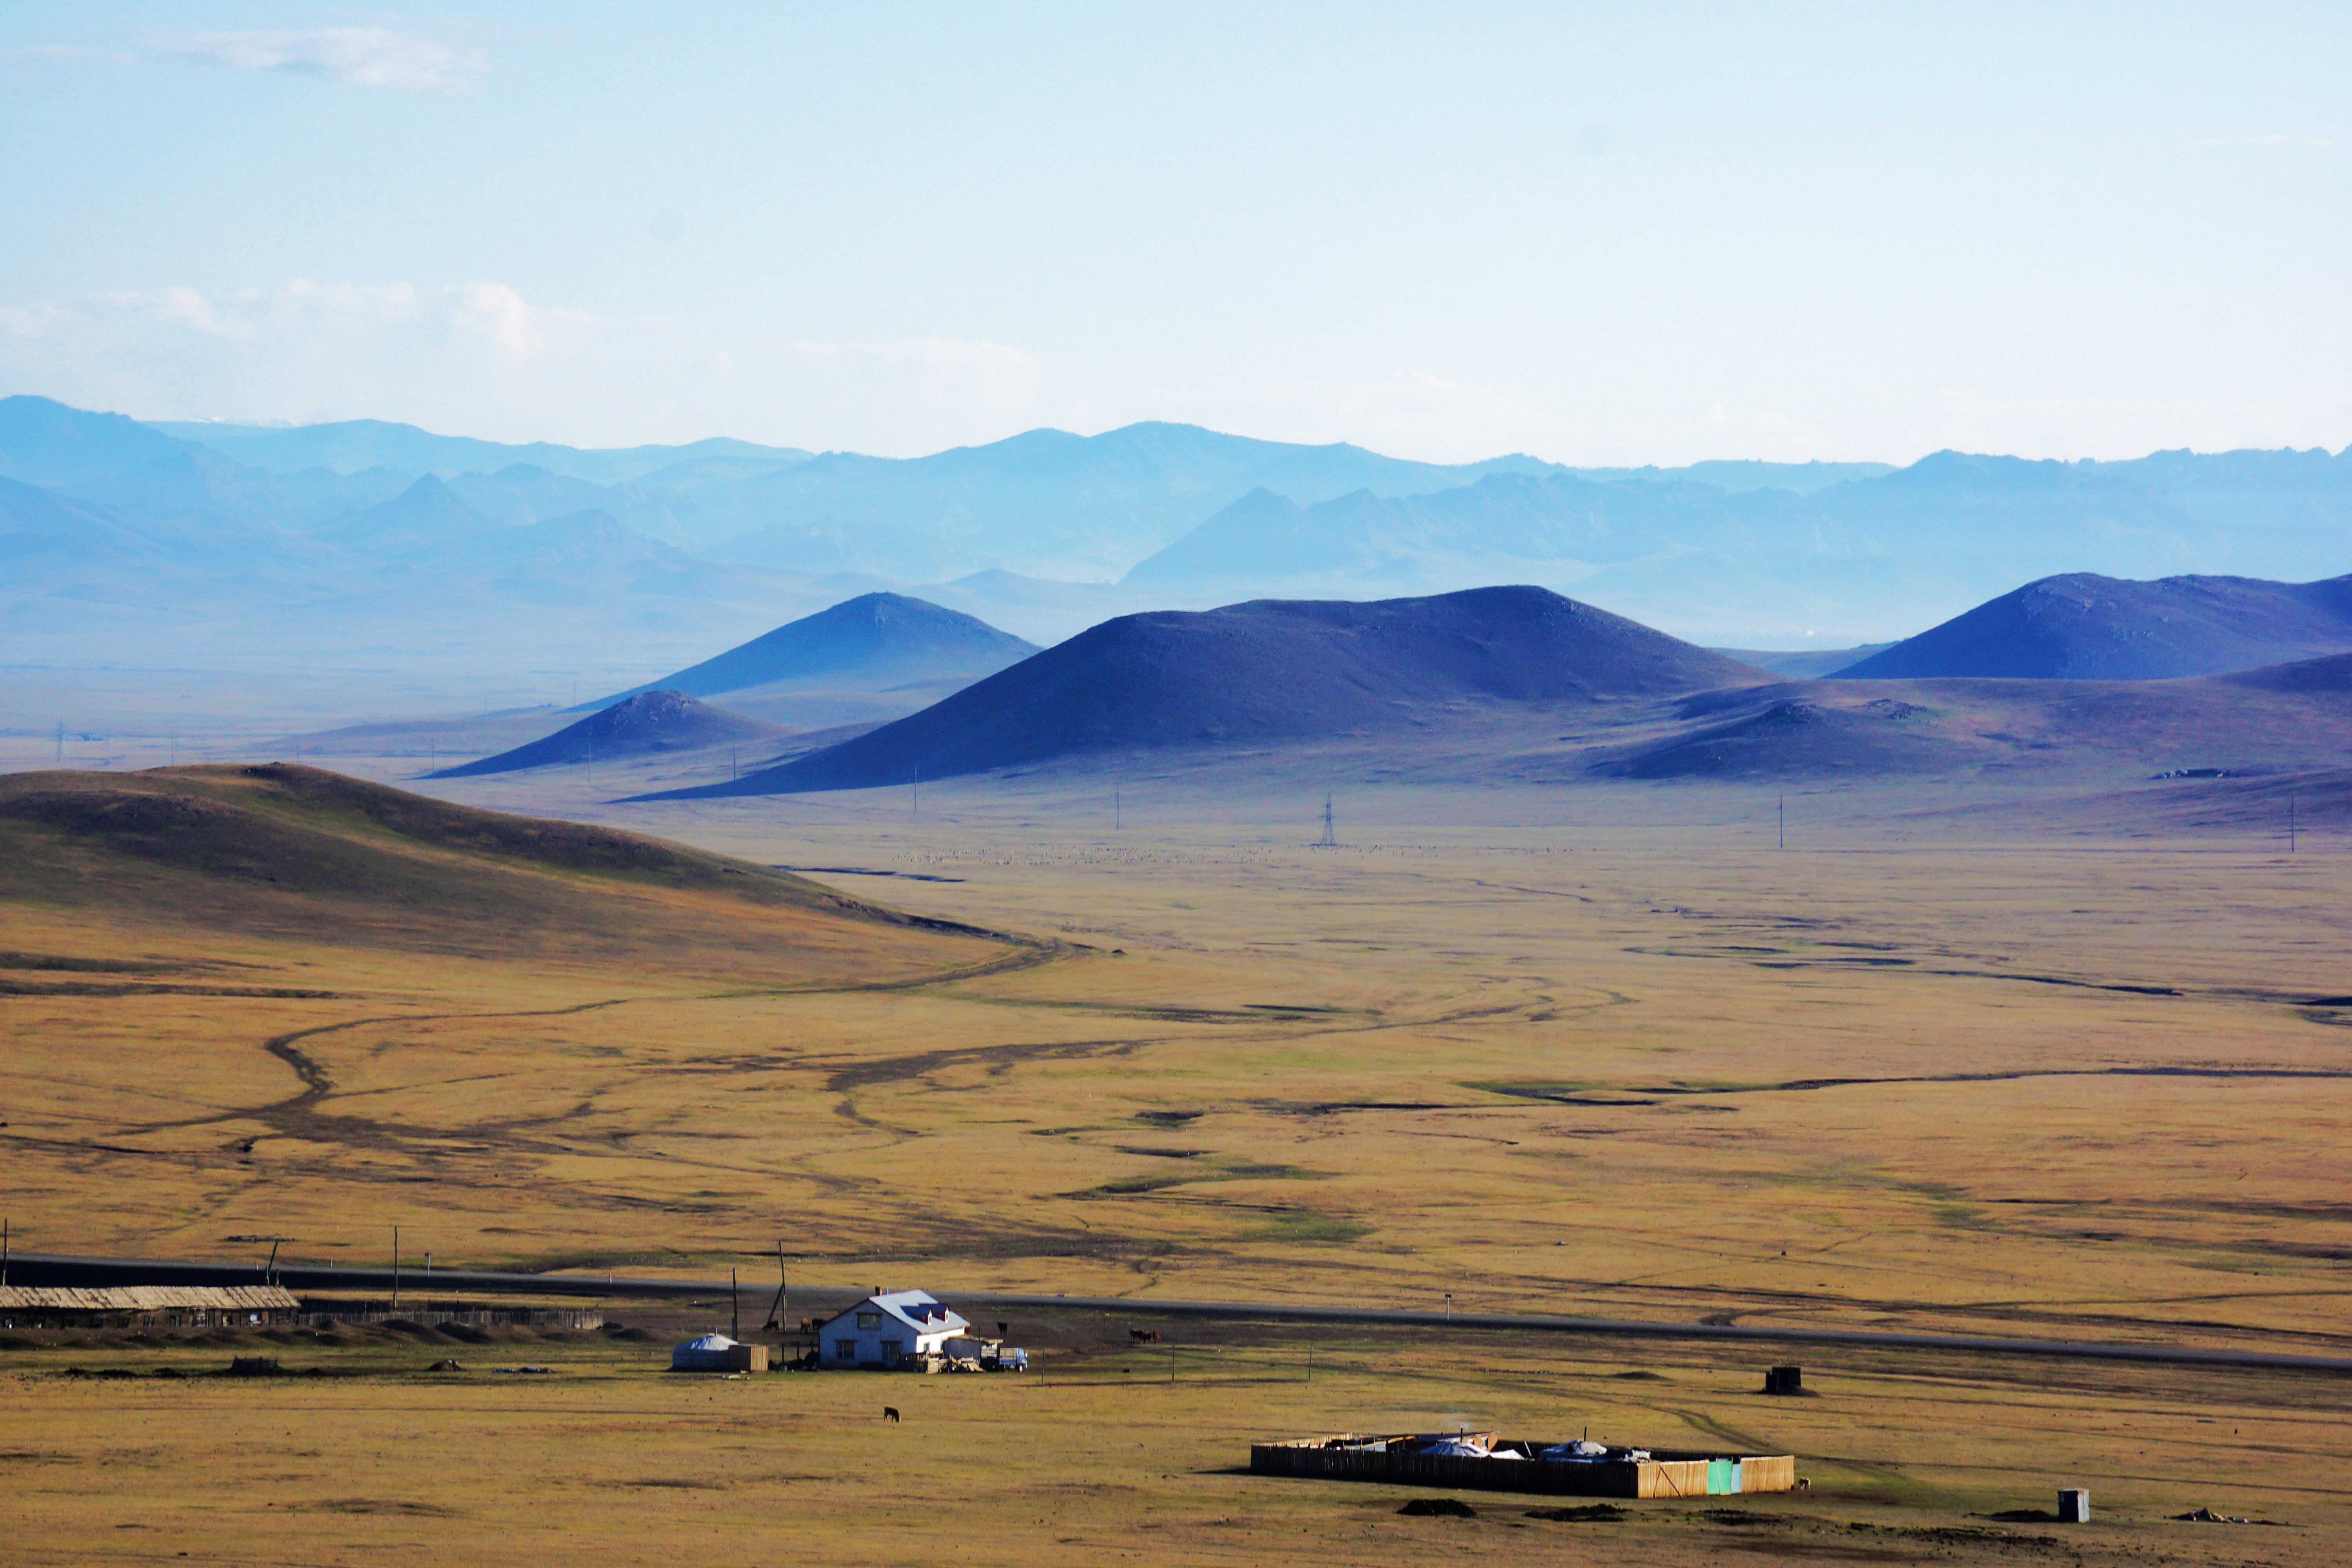 Mongolia hoped it would be put on the diplomatic map when speculation grew Ulan Bator would host a meeting between the two leaders. Now those dreams seem as empty as its vast open plains